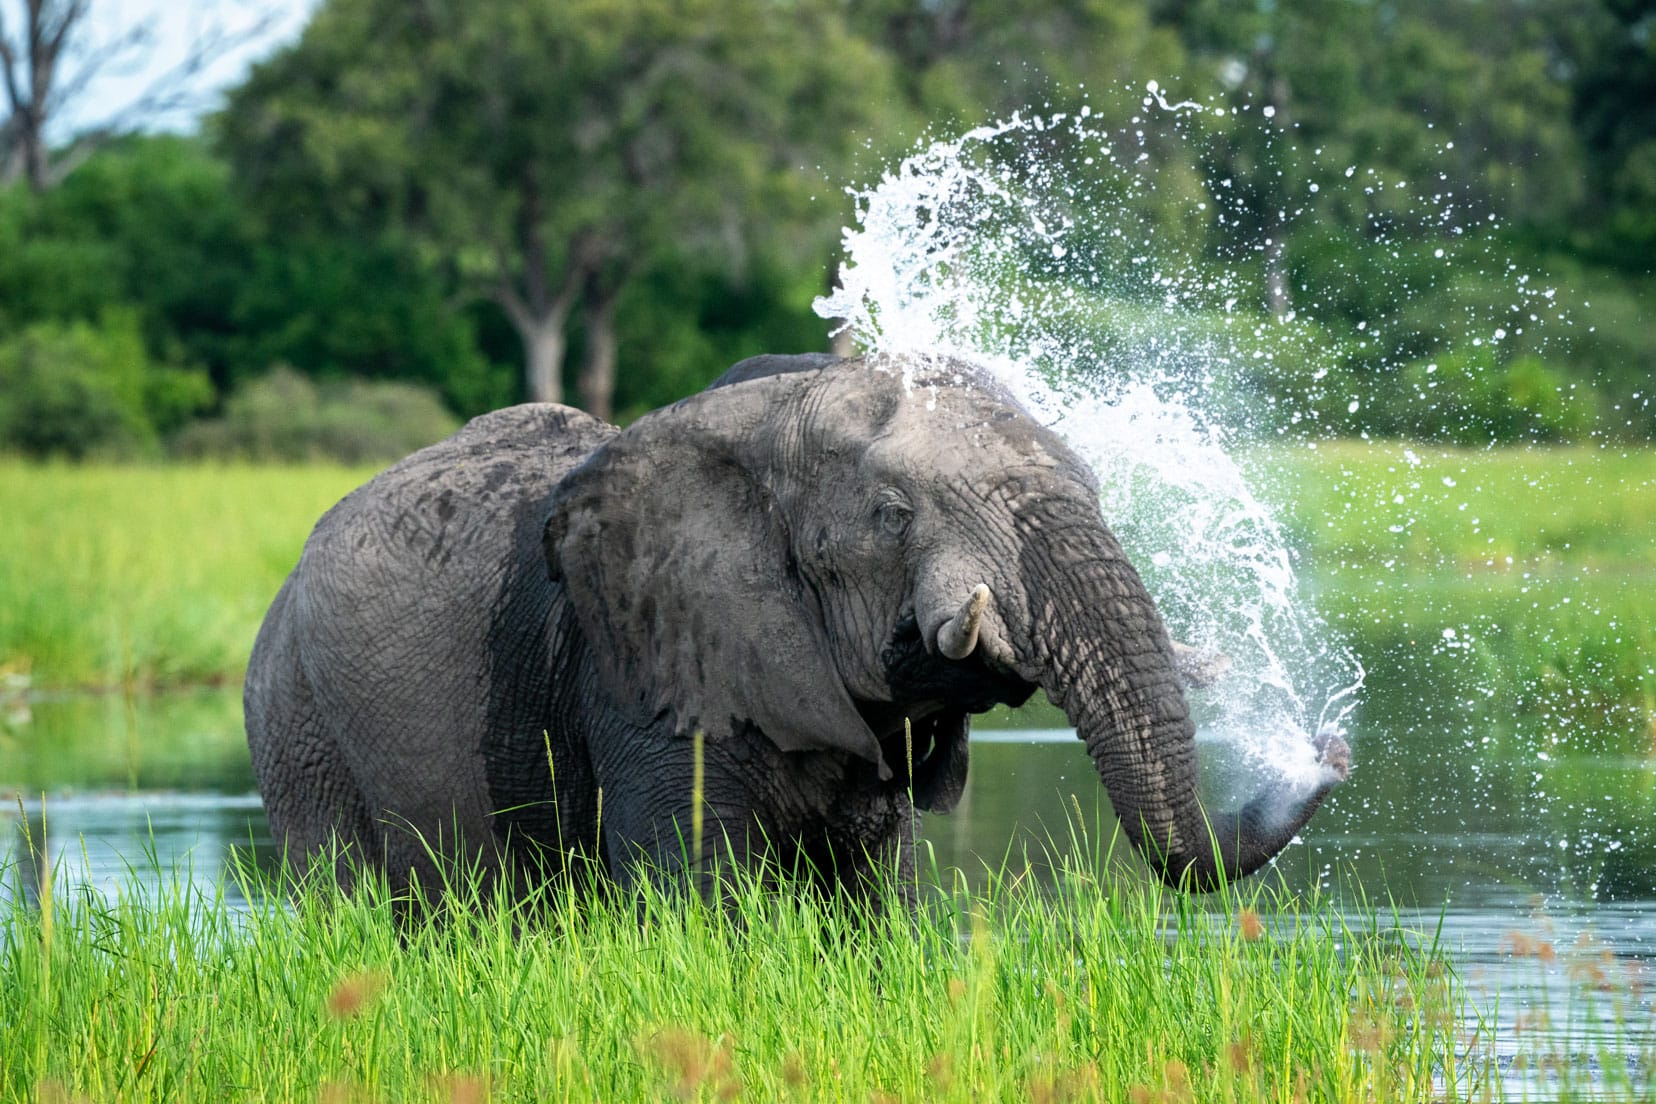 Elephant in river spraying  water